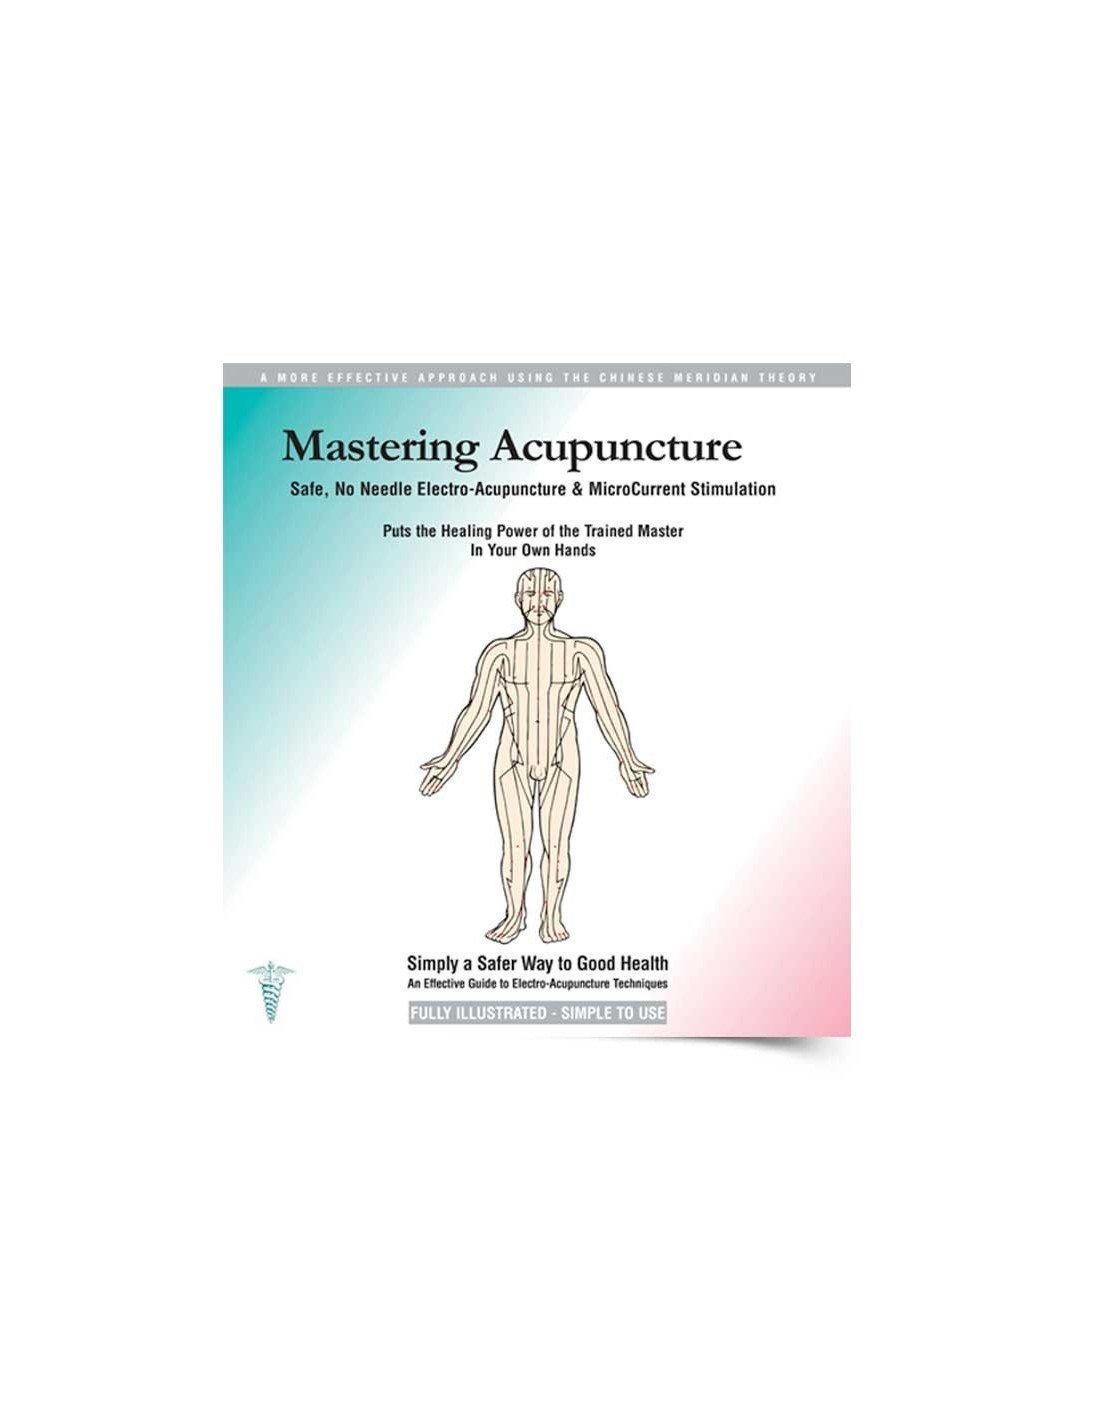 66 List Acupuncture Without Needles Book for business